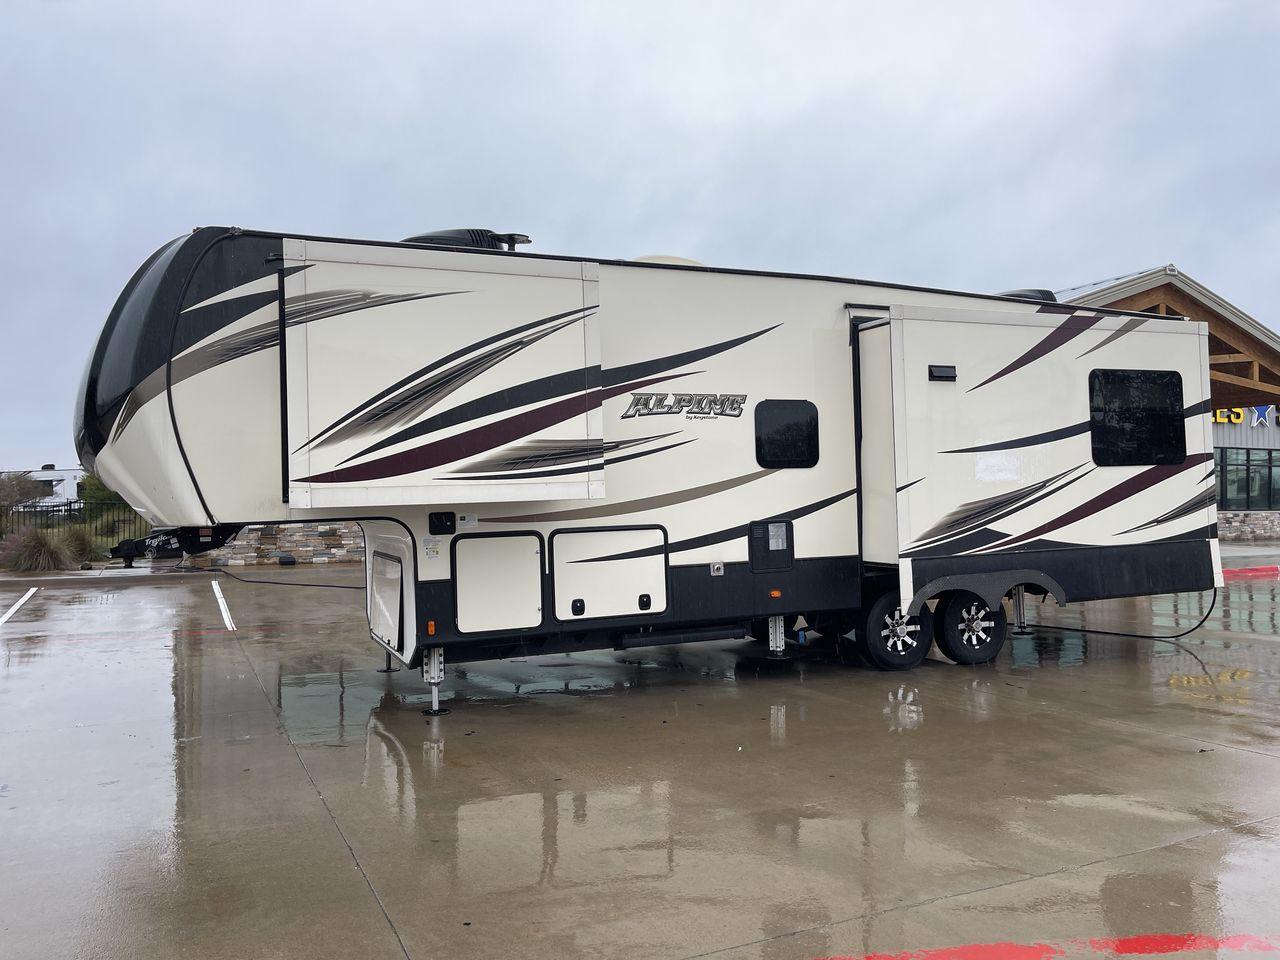 2018 KEYSTONE ALPINE 3011RE (4YDF30127JE) , Length: 34.08 ft. | Dry Weight: 11,945 lbs. | Gross Weight: 15,000 lbs. | Slides: 3 transmission, located at 4319 N Main Street, Cleburne, TX, 76033, (817) 221-0660, 32.435829, -97.384178 - The definition of luxury travel comes with the 2018 Keystone Alpine 3011RE. This is an opulent fifth-wheel trailer designed for discerning adventurers. Spanning 34 feet, this exquisite model boasts three slide-outs, creating a sprawling interior that redefines comfort on the road. The master bedroom - Photo #24